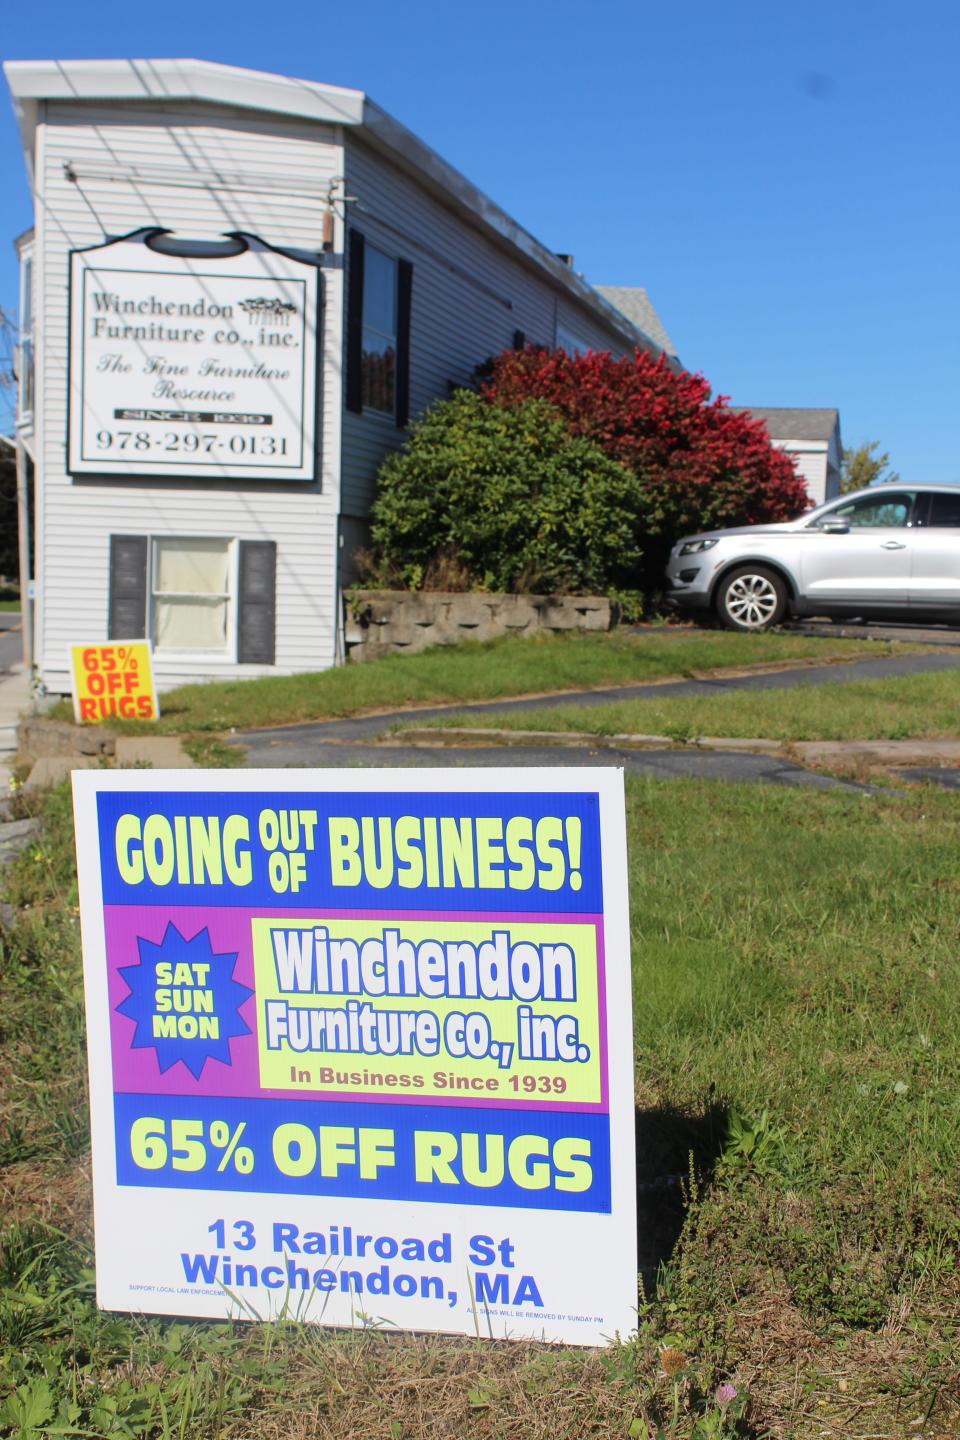 A multi-generational family business, Winchendon Furniture is going out of business. The Ladeau family has been in business for 84 years at the 13 Railroad St., Winchendon location. The Keene, New Hampshire, location has been closed since Saturday, Sept. 30.